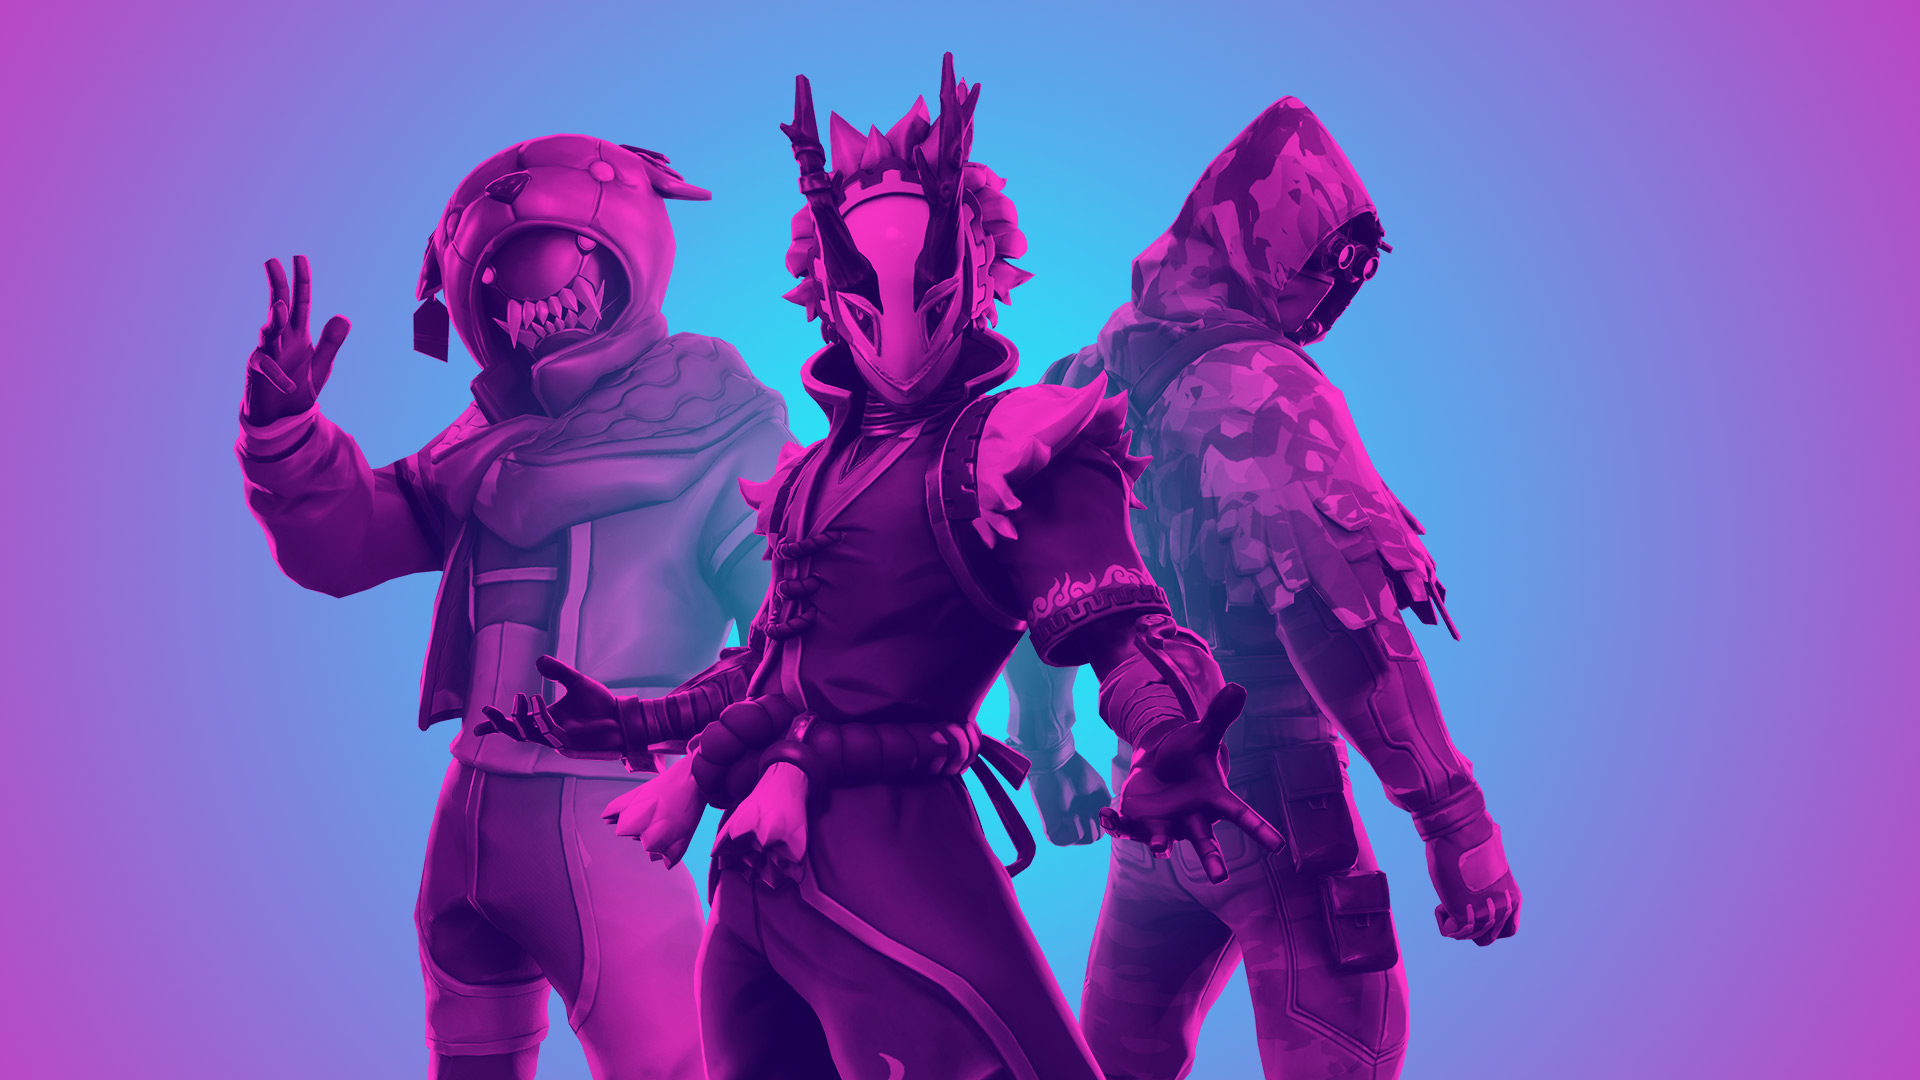 Fortnite Competitive Players Report Chinese Duo For Teaming During - fortnite competitive players report chinese duo for teaming during world cup qualifiers